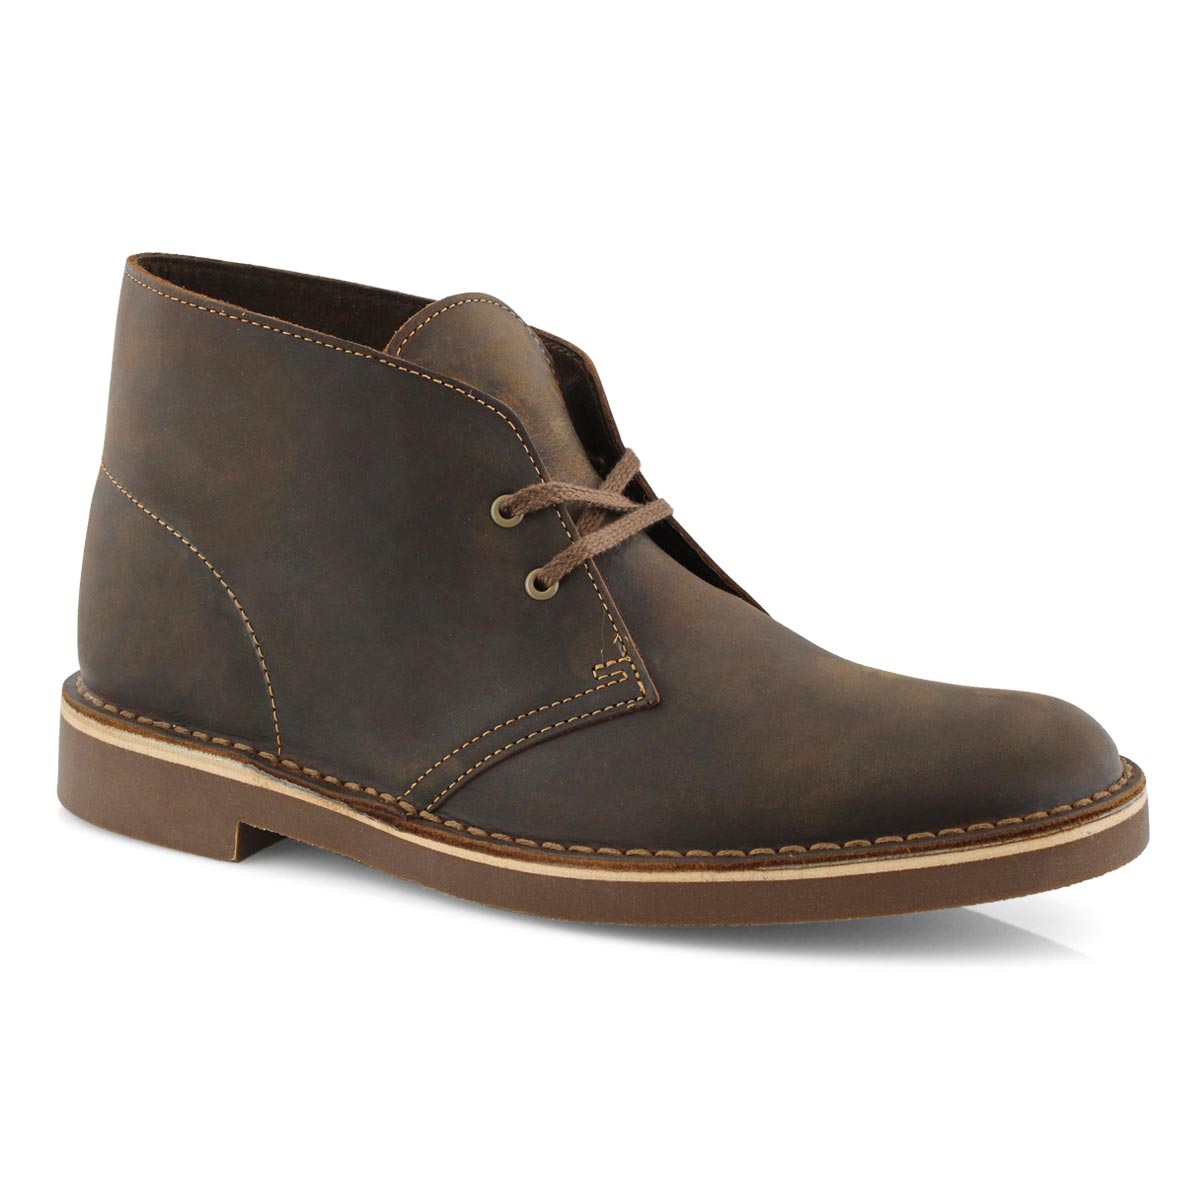 clarks 82286 off 71% - online-sms.in